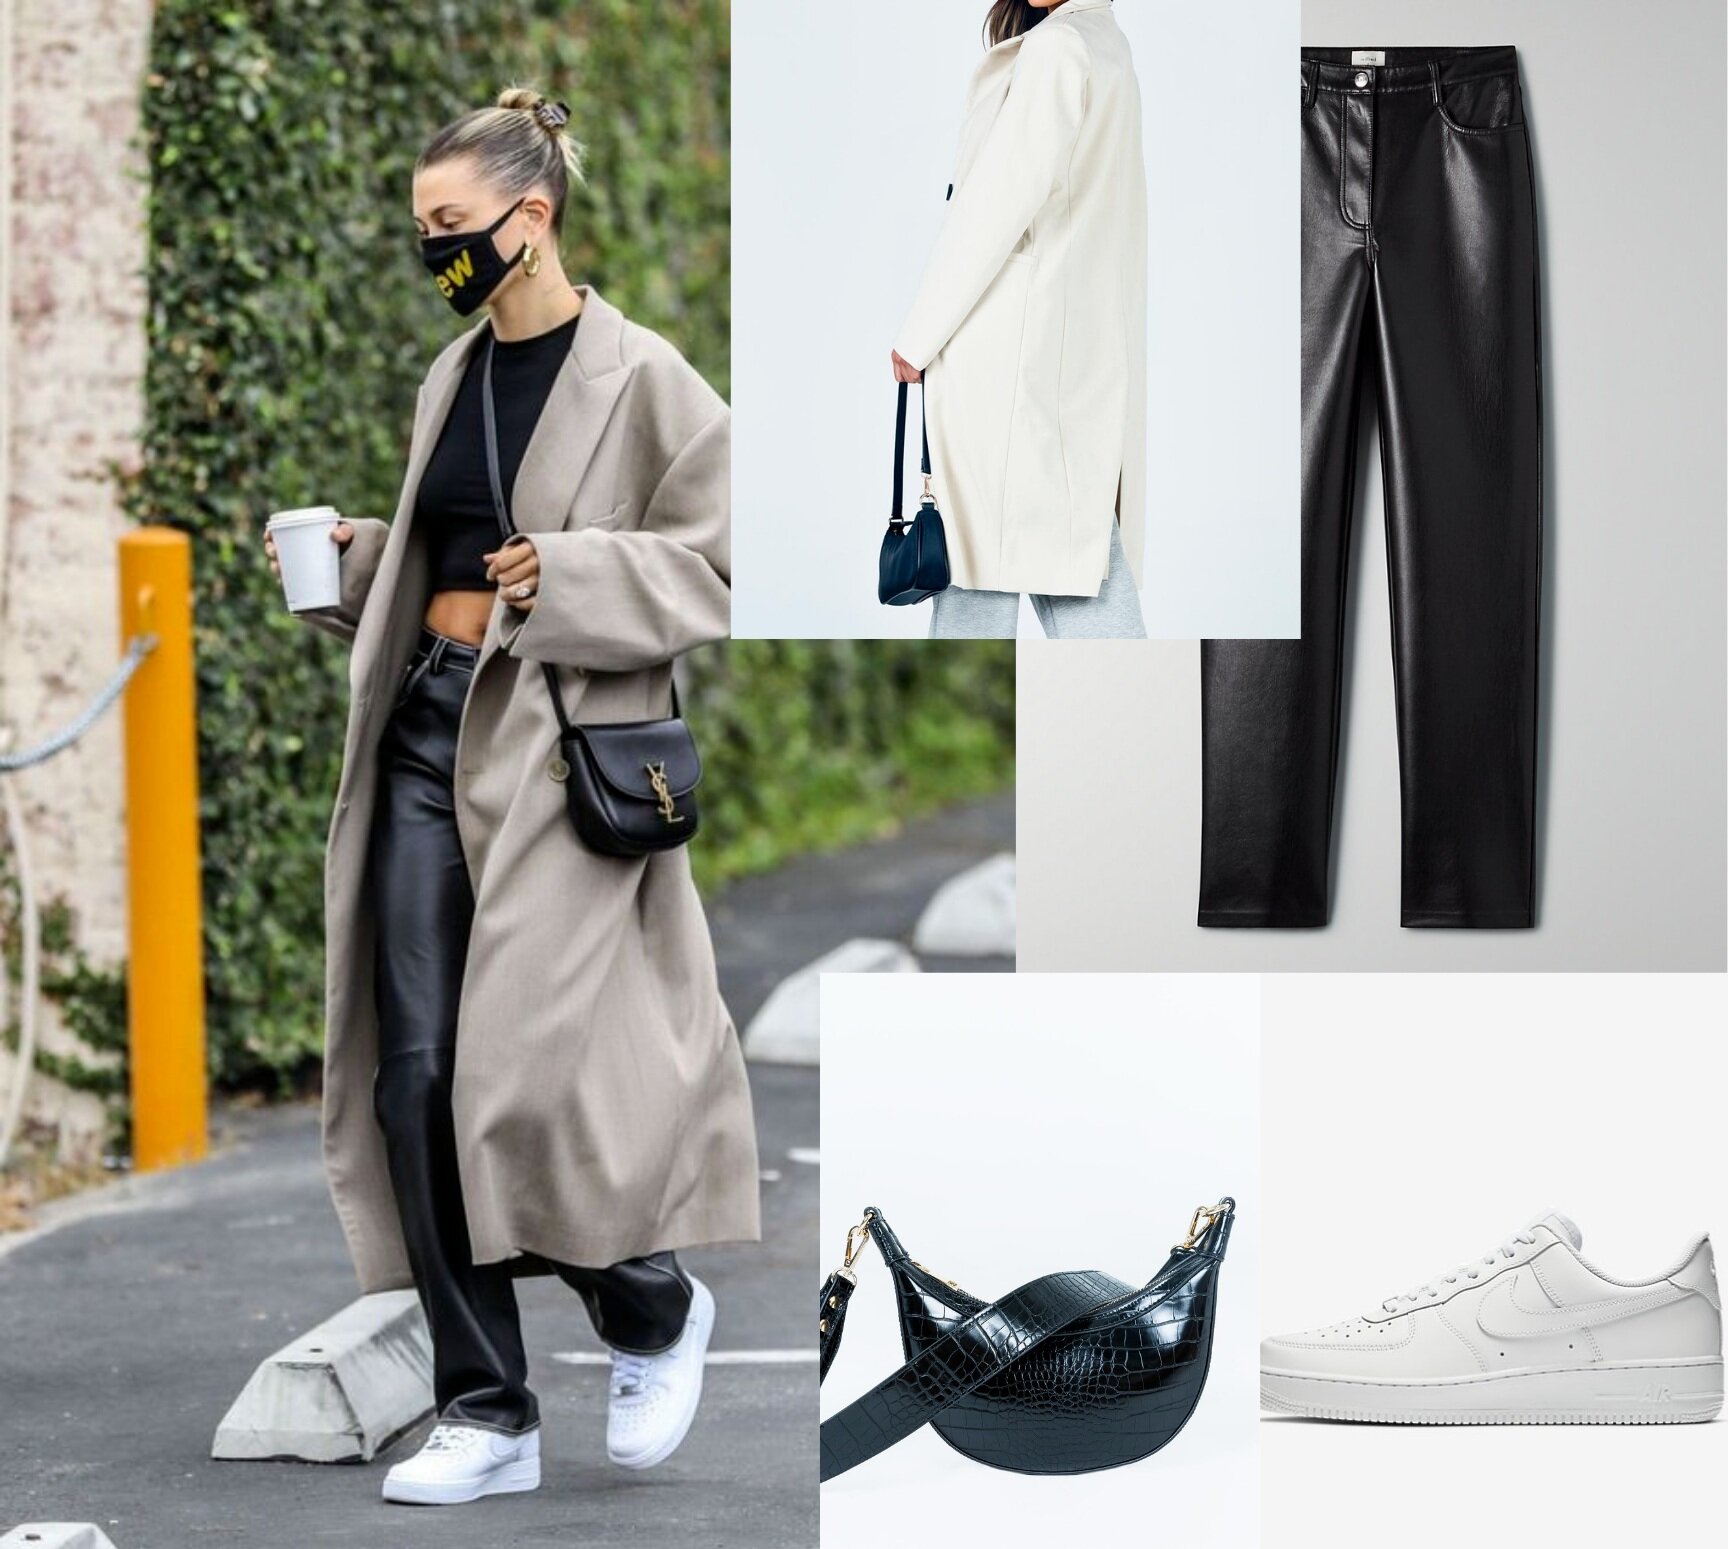 HOW TO GET HAILEY BIEBER'S ICONIC STREET STYLE LOOKS FOR LESS